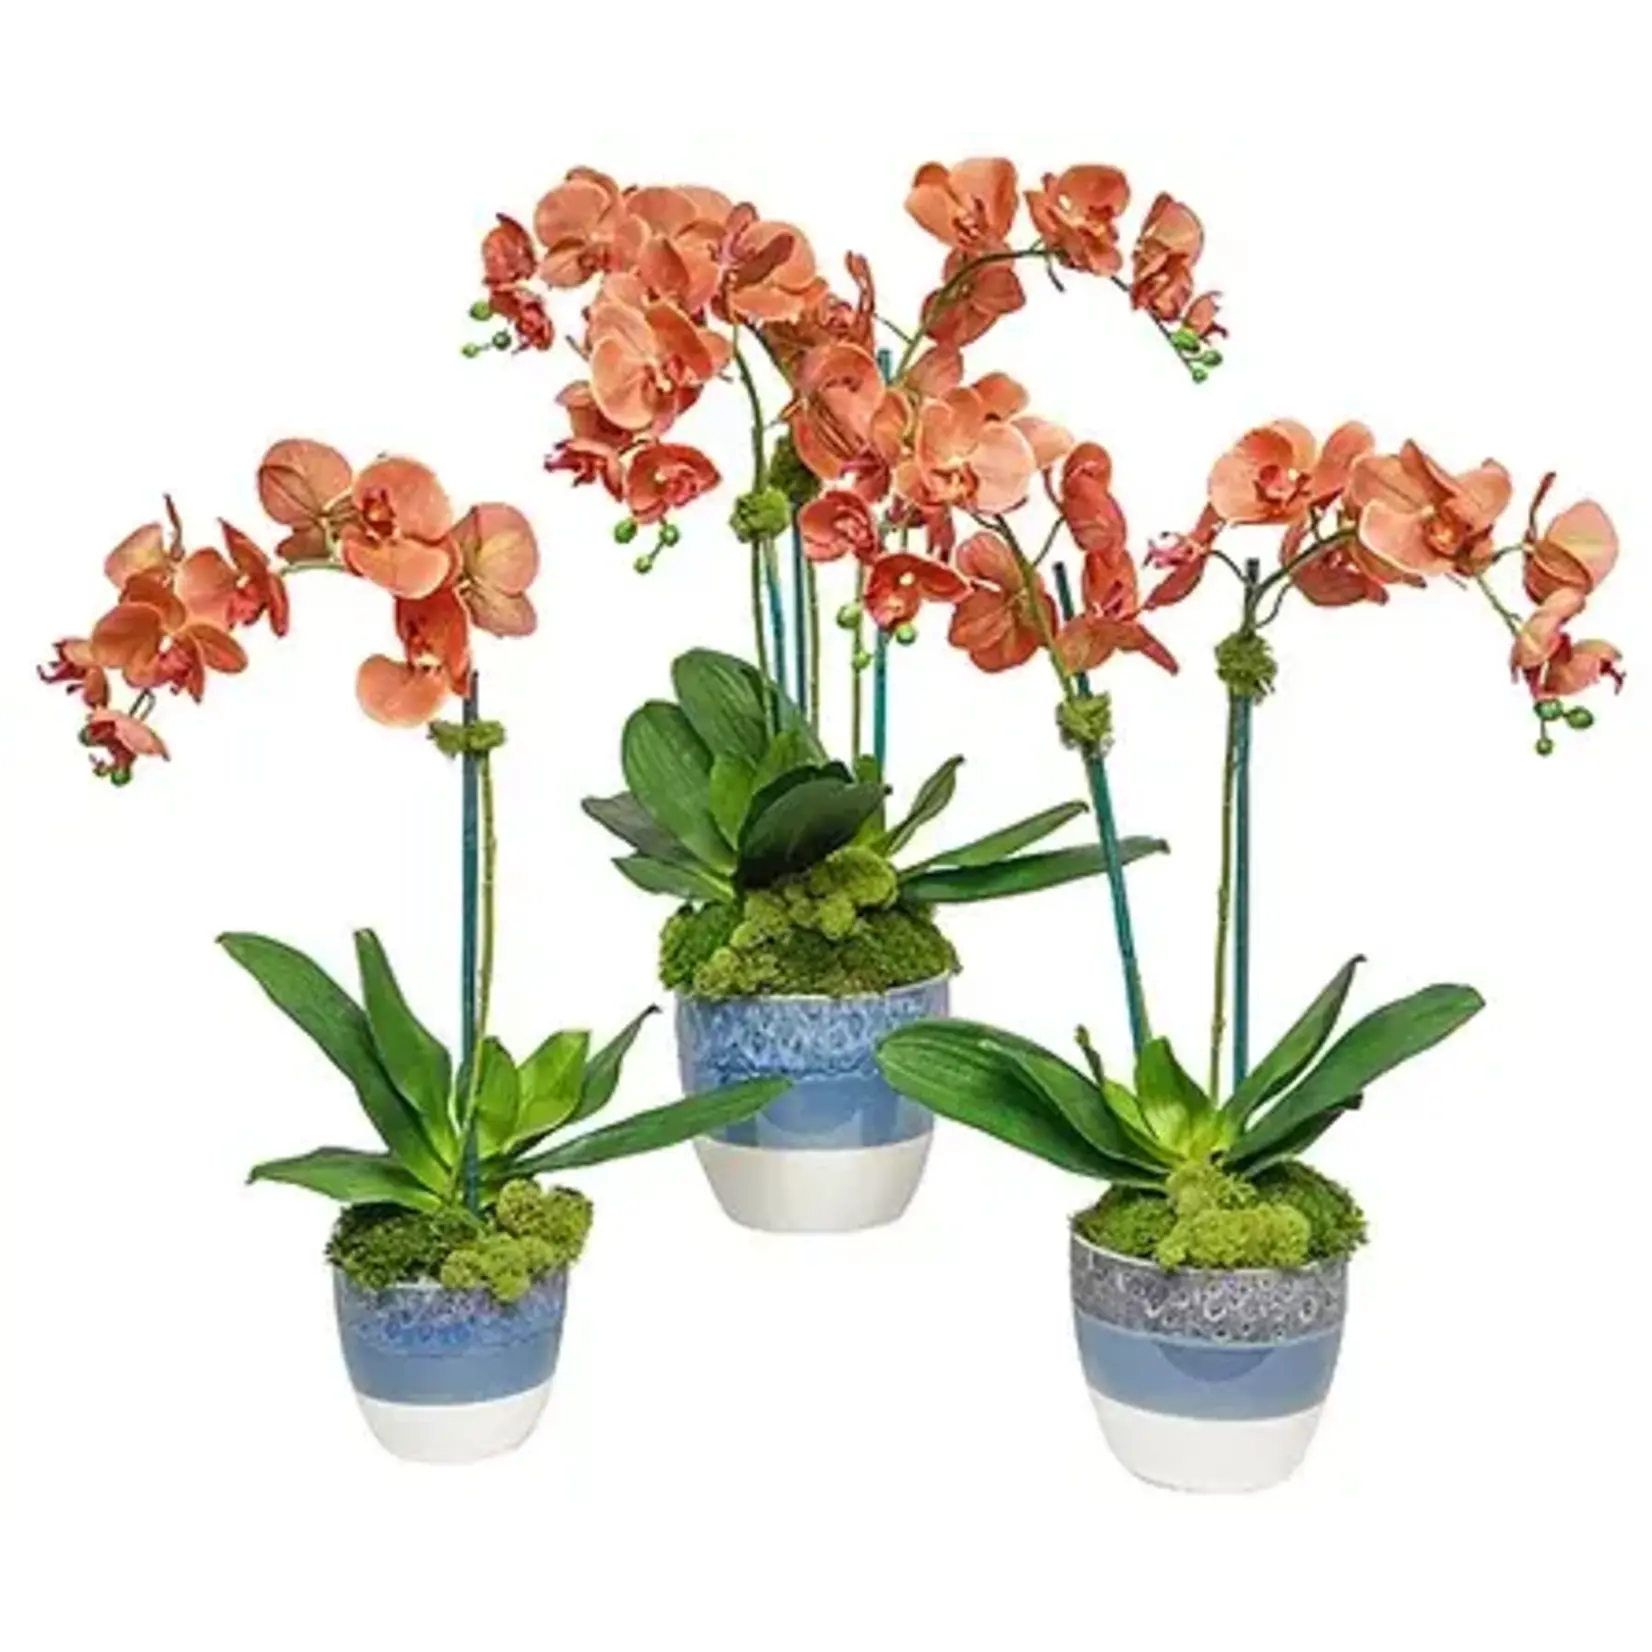 The Ivy Guild Coral Orchids Small Arrangement